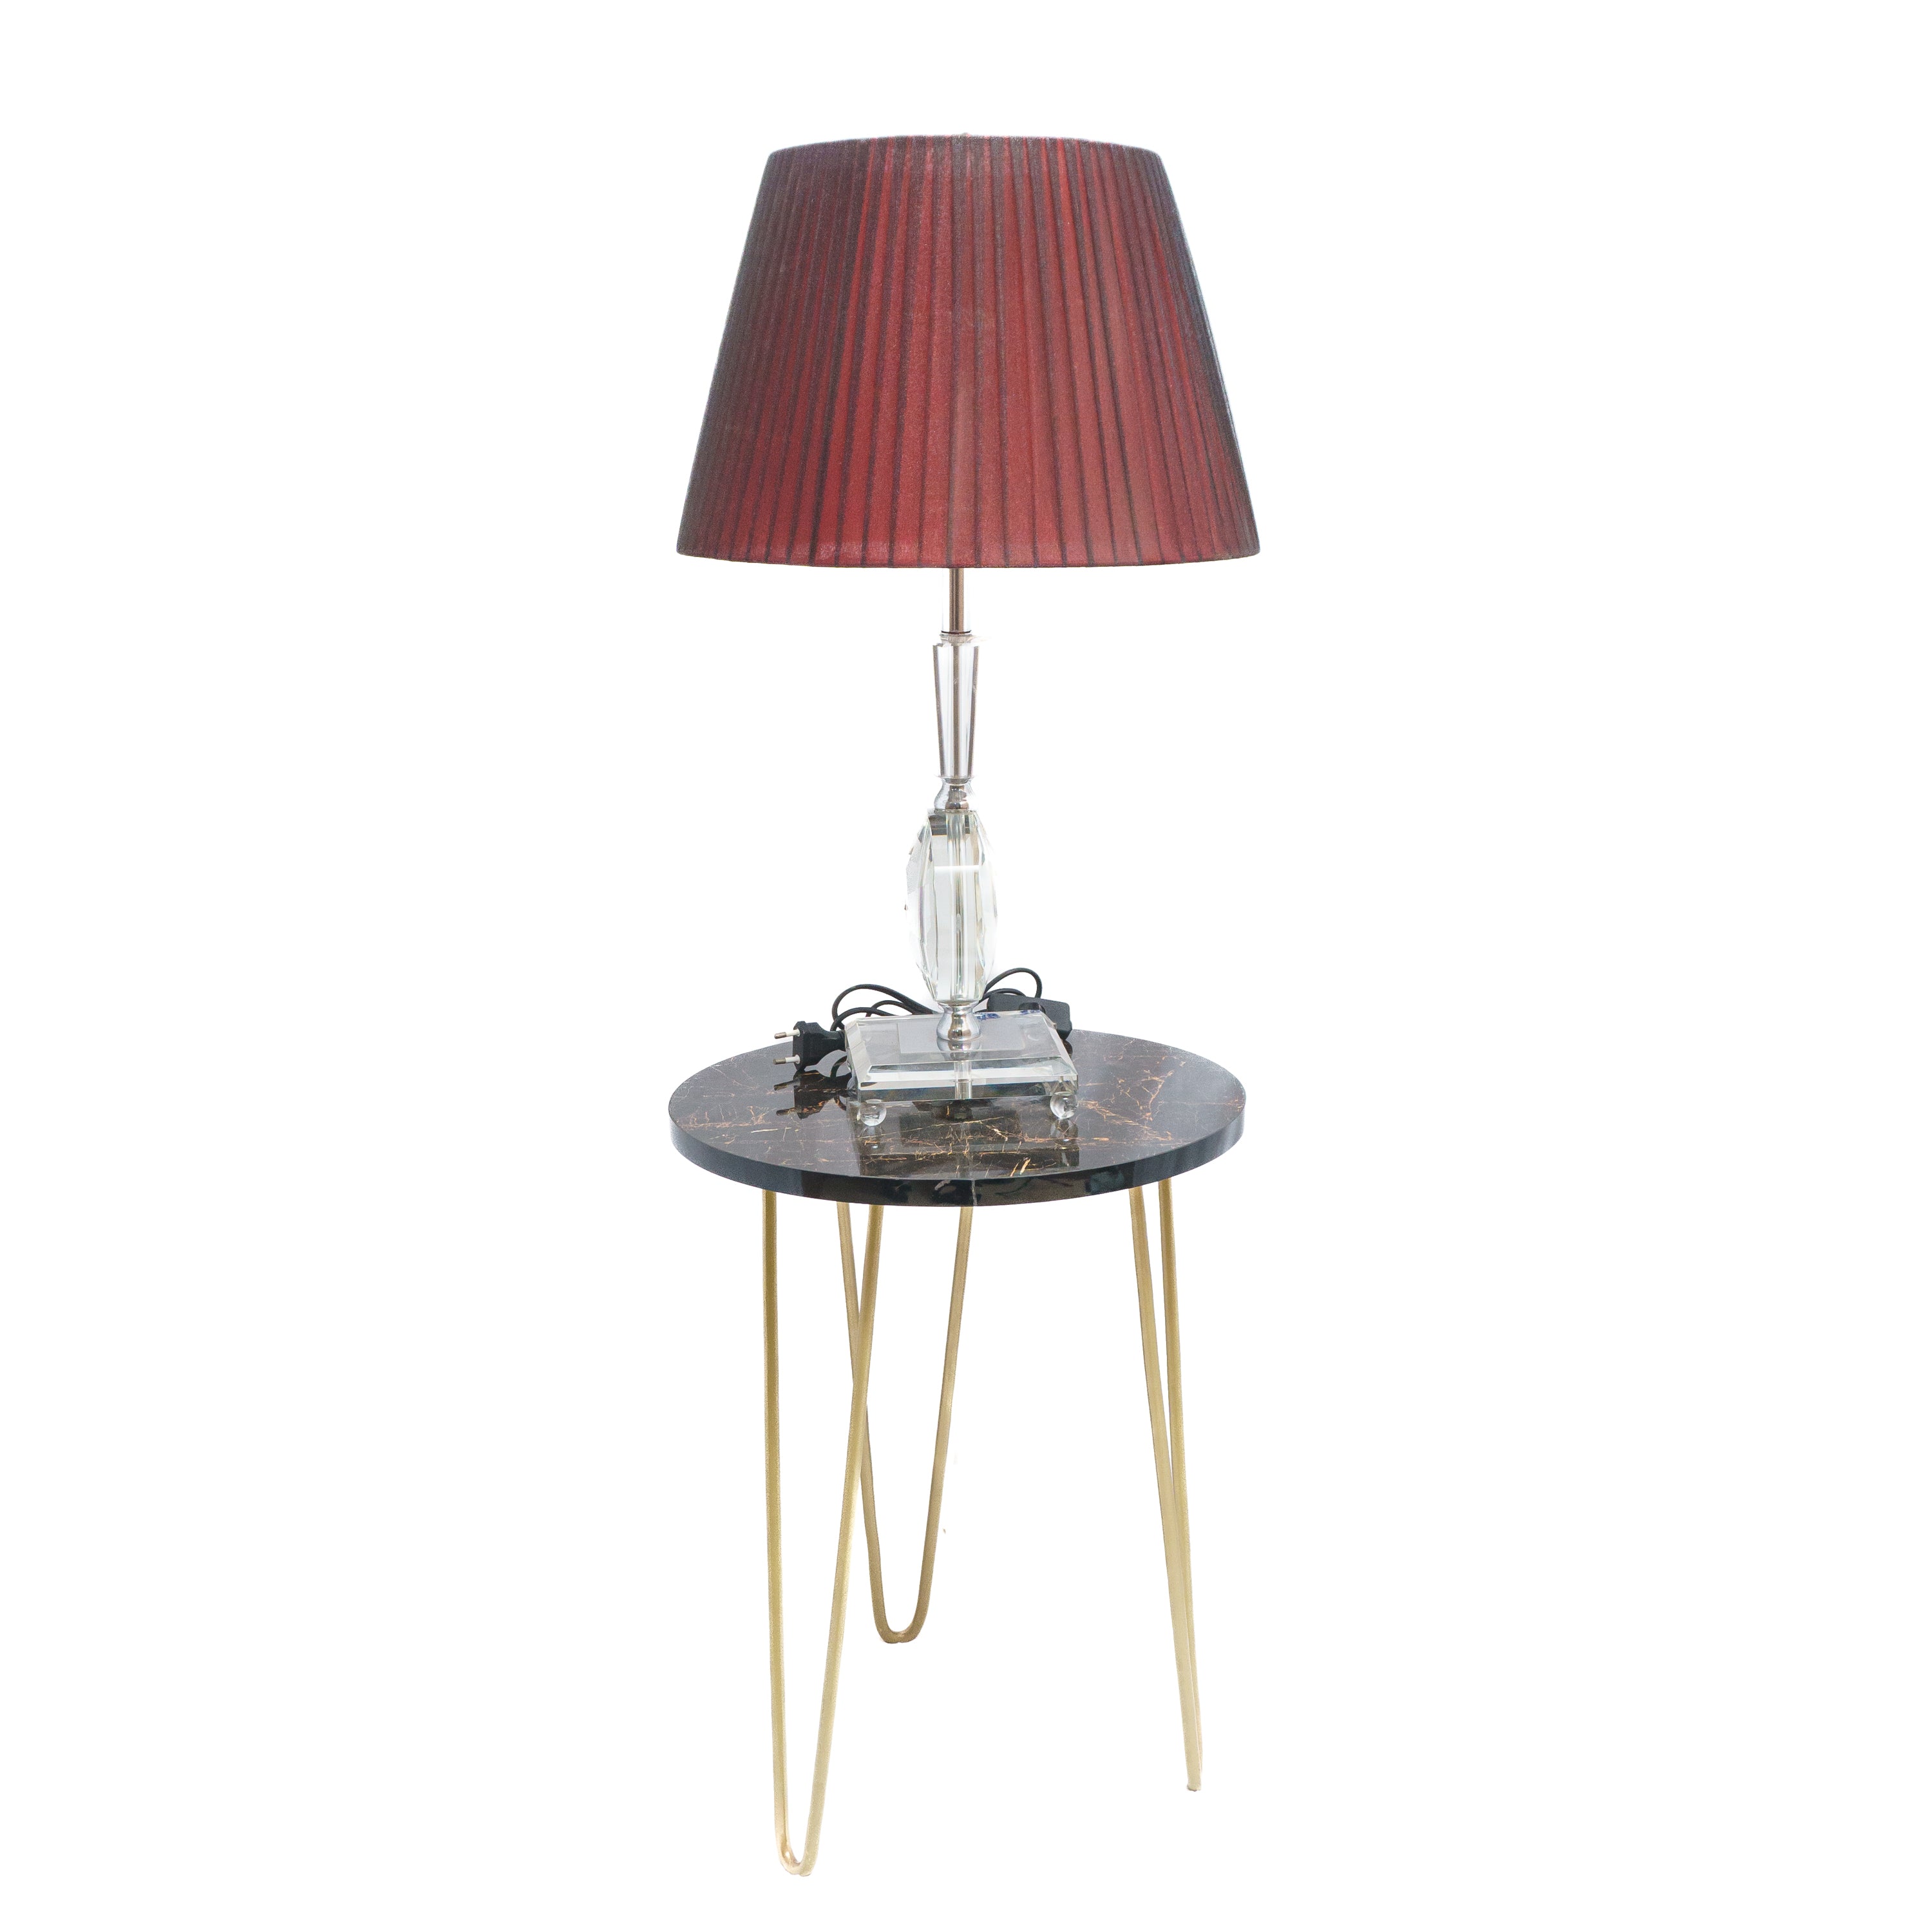 Maroon Elegance Electric Table Lamp: Fabric Shade with White Crystal Lamp Stand and Base